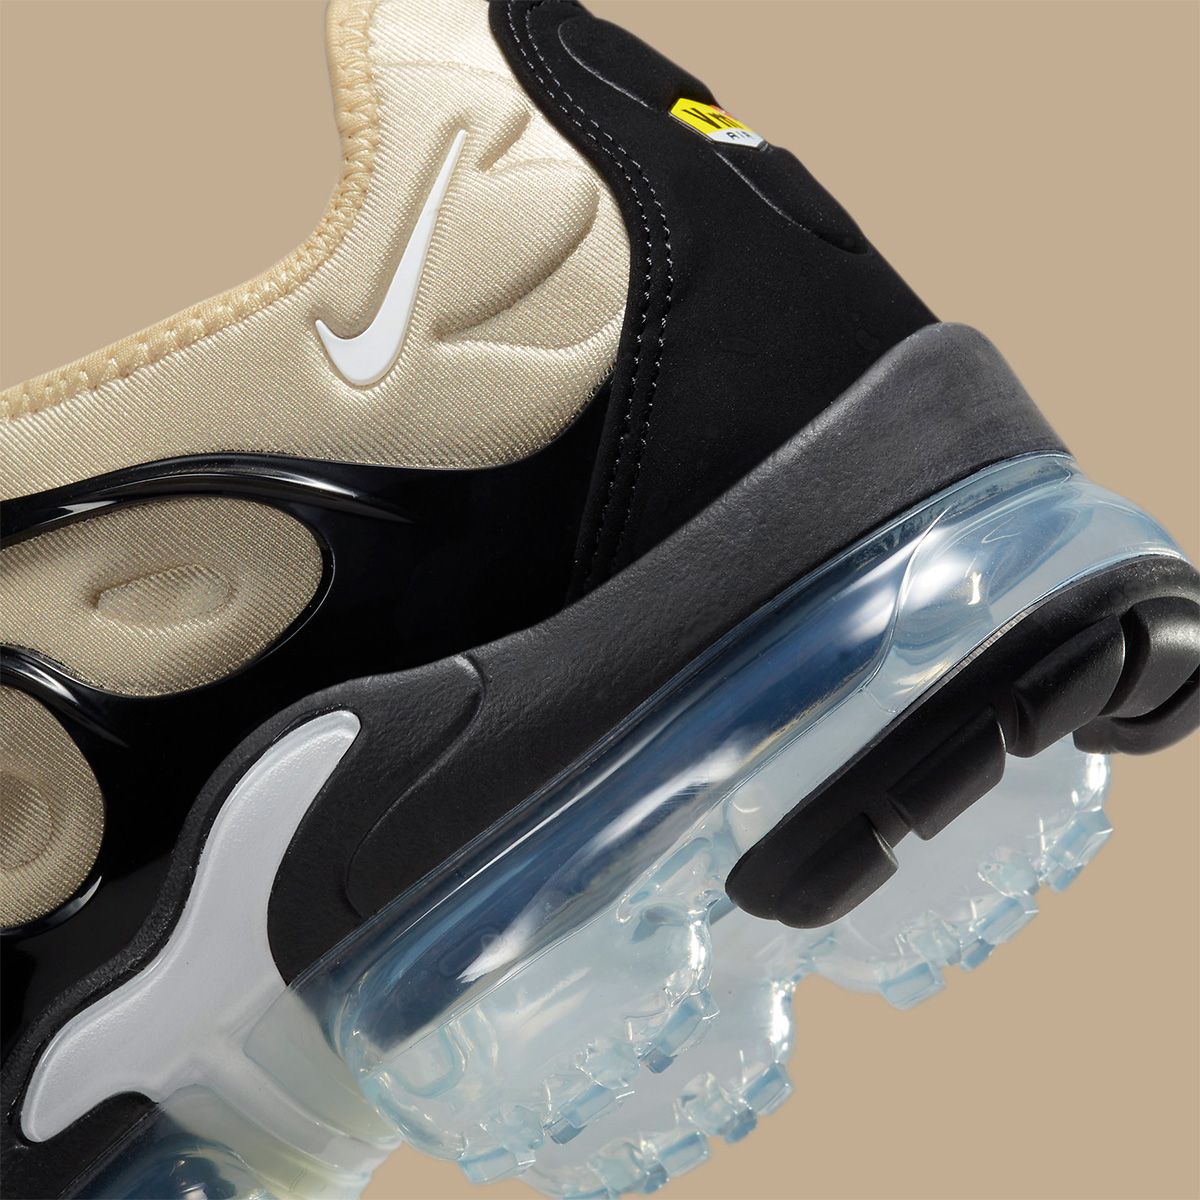 gallon pronunciation fuel The Nike Air VaporMax Plus Appears in Beige and Black | HOUSE OF HEAT